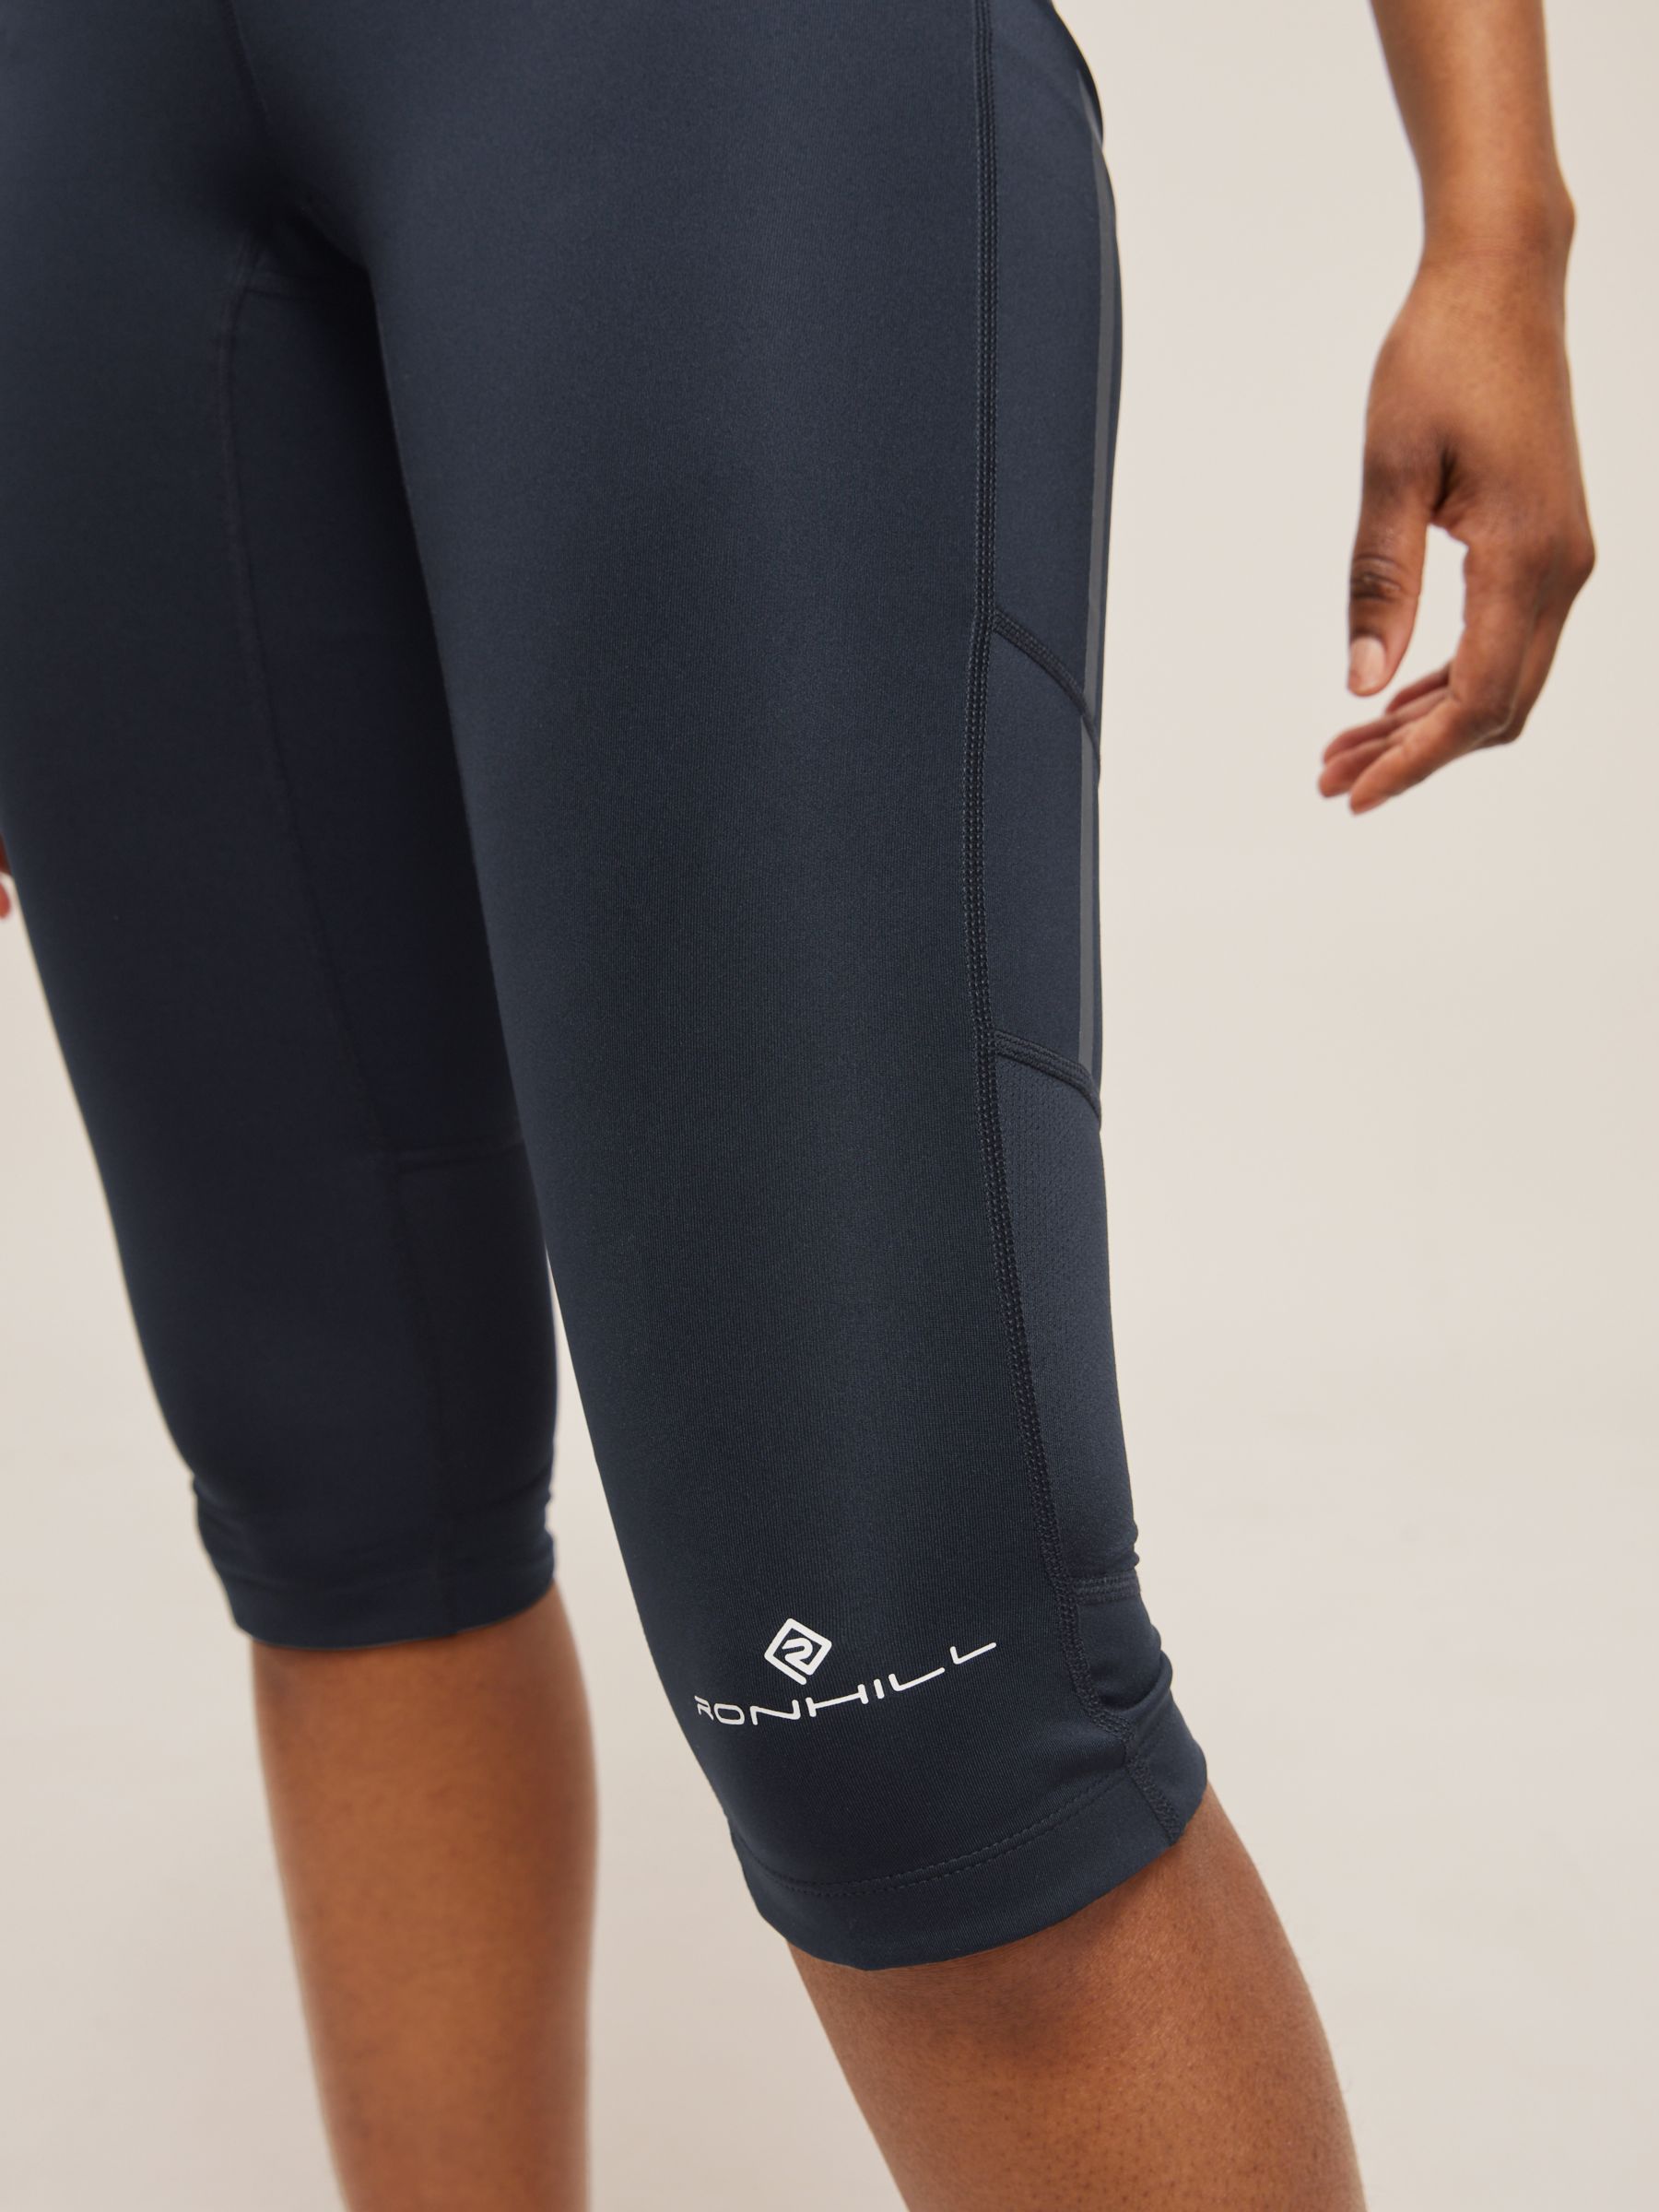 Ronhill Tech Revive Stretch Running Leggings at John Lewis & Partners